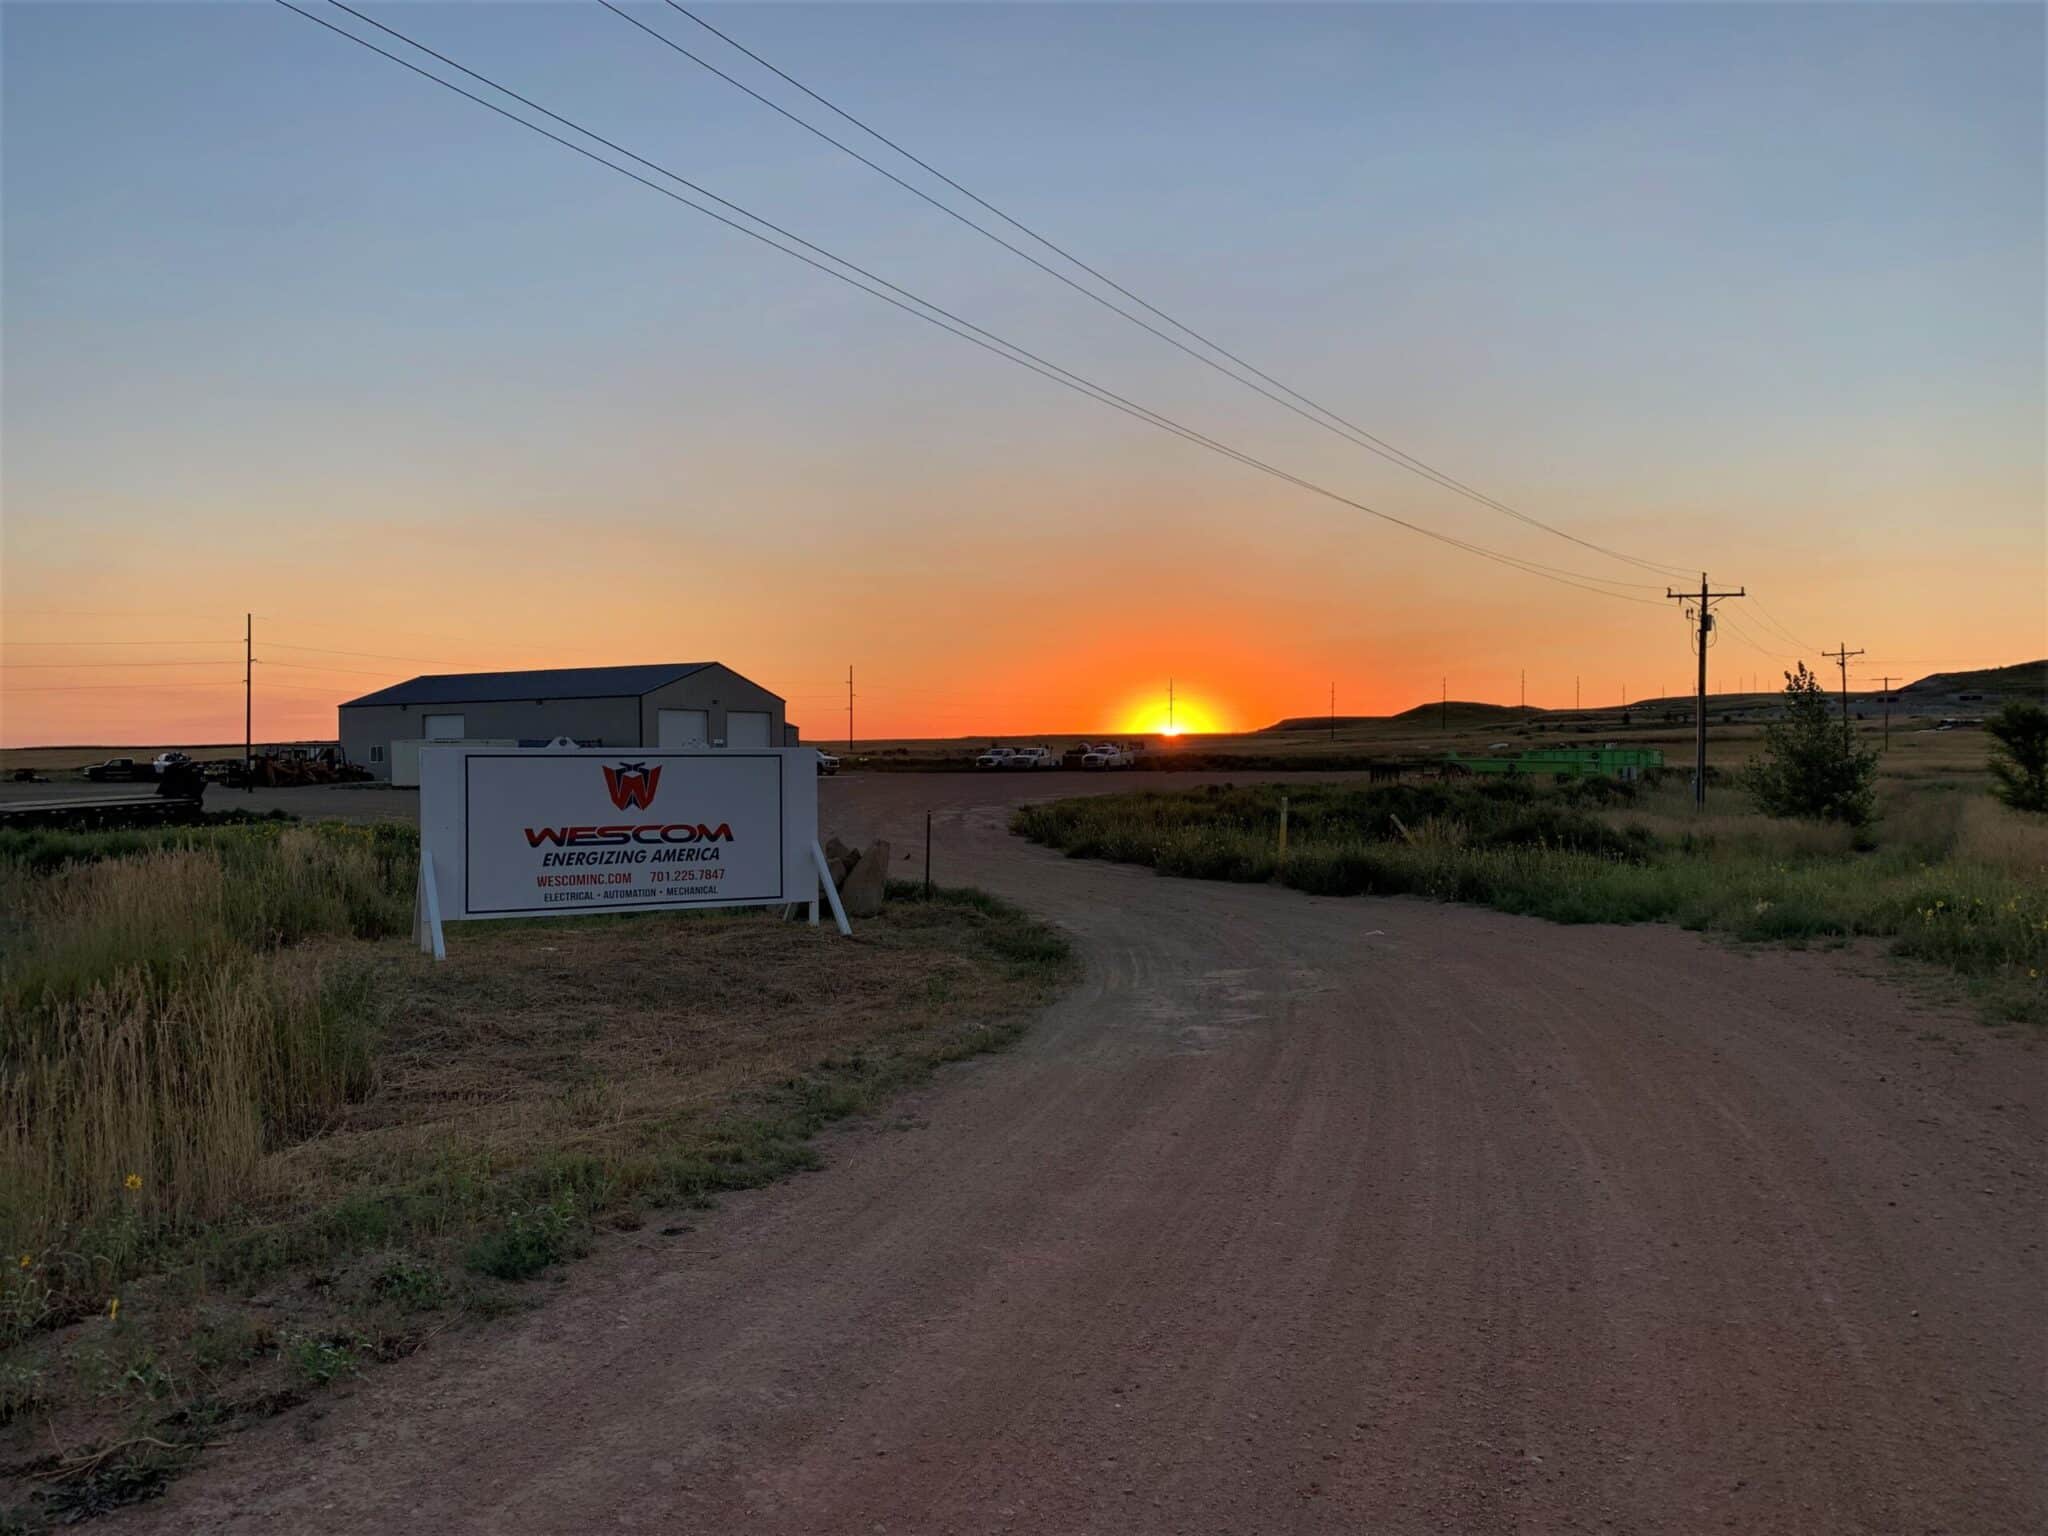 Photo of the Wescom sign and shop with the sunset in the background in North Dakota/Bakken